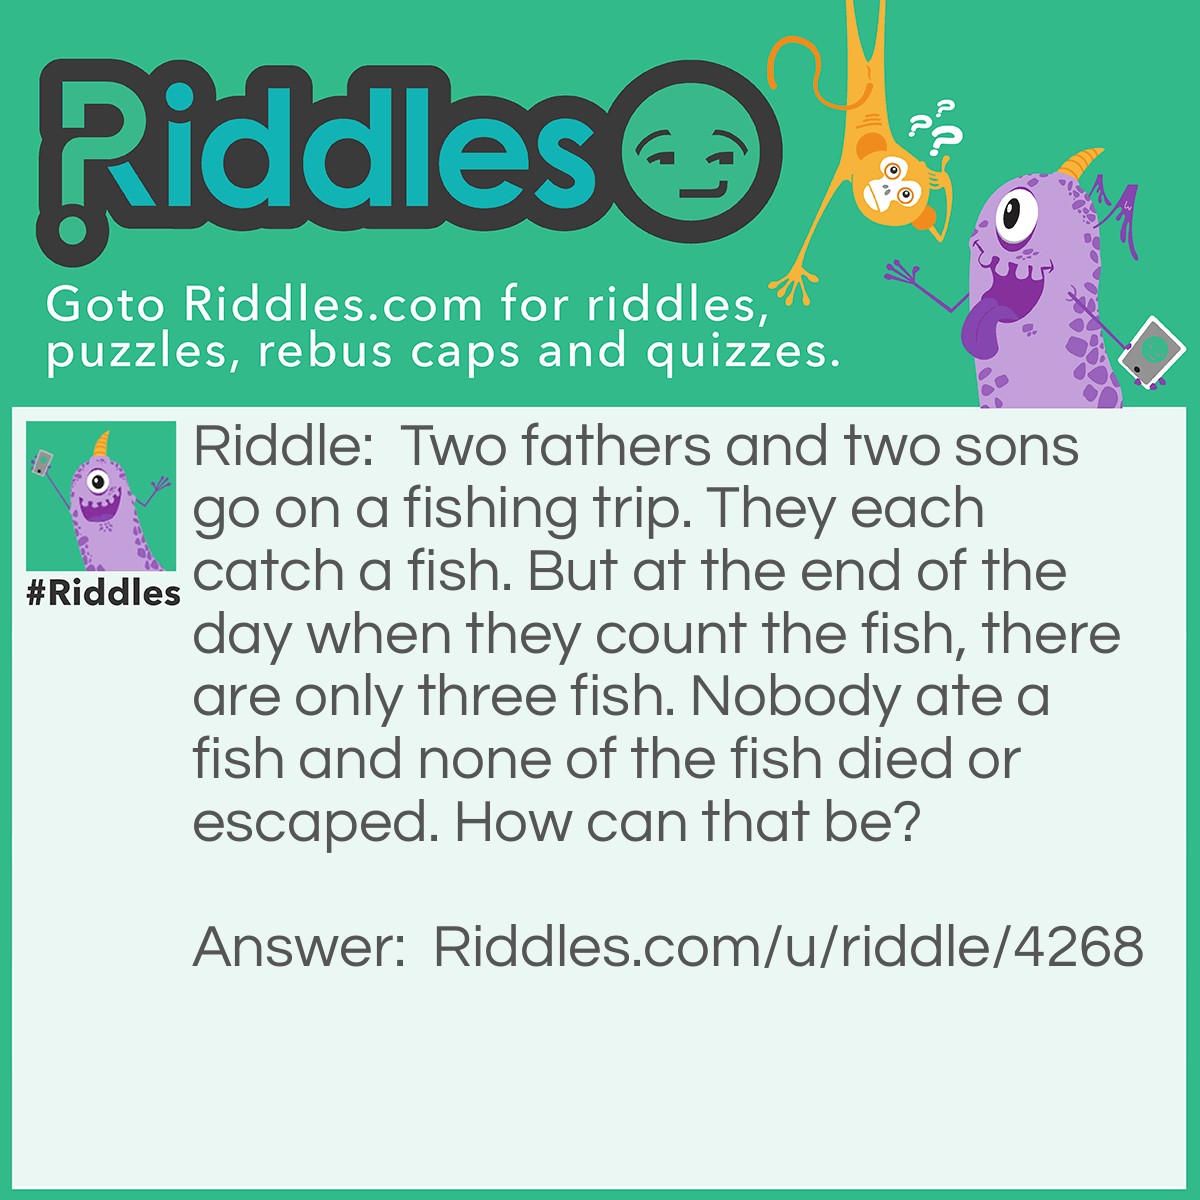 Riddle: Two fathers and two sons go on a fishing trip. They each catch a fish. But at the end of the day when they count the fish, there are only three fish. Nobody ate a fish and none of the fish died or escaped. How can that be? Answer: Only three people went on the fishing trip. A grandfather, a father and a son went on the fishing trip. The grandfather is one of the fathers, the father is one of the fathers and one of the sons and the son is one of the sons. In total there are two fathers and two sons.